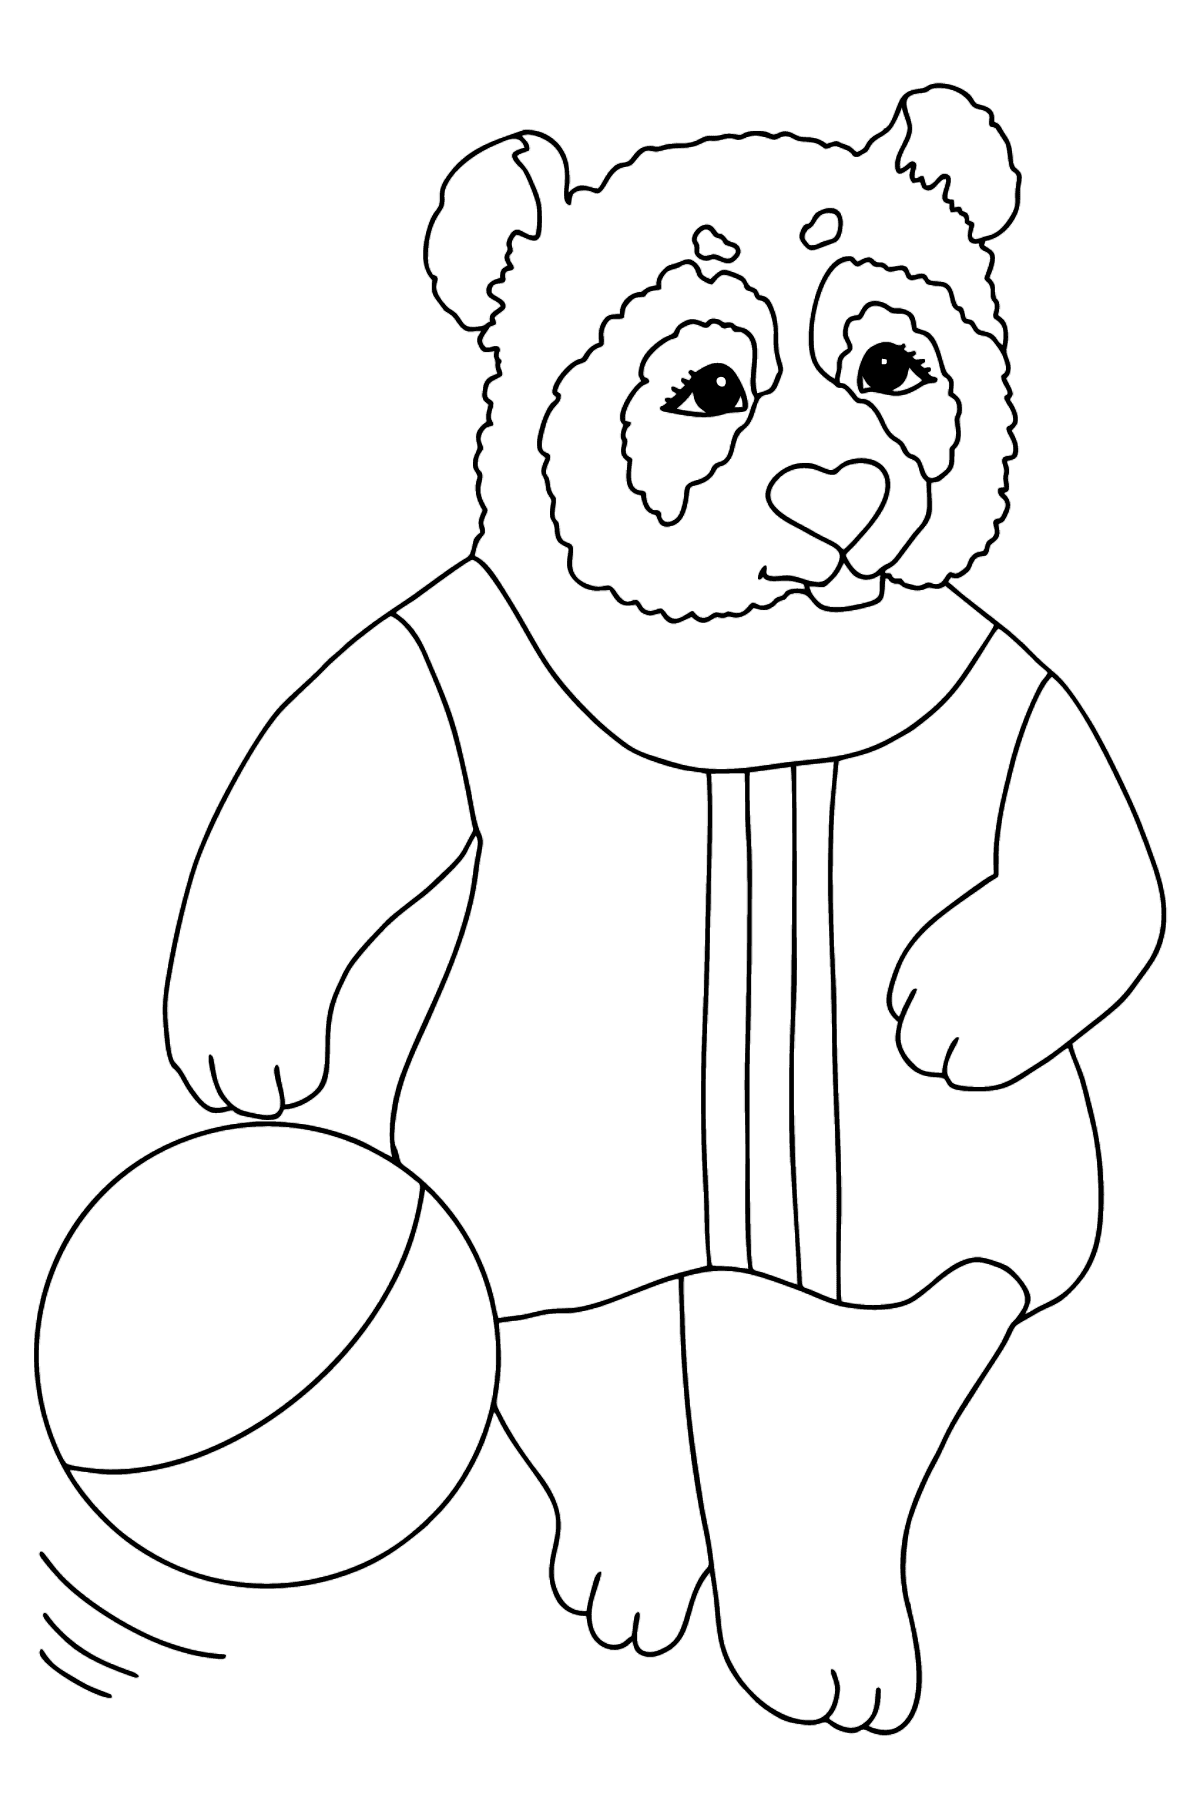 Panda For Babies (Difficult) coloring page - Coloring Pages for Kids